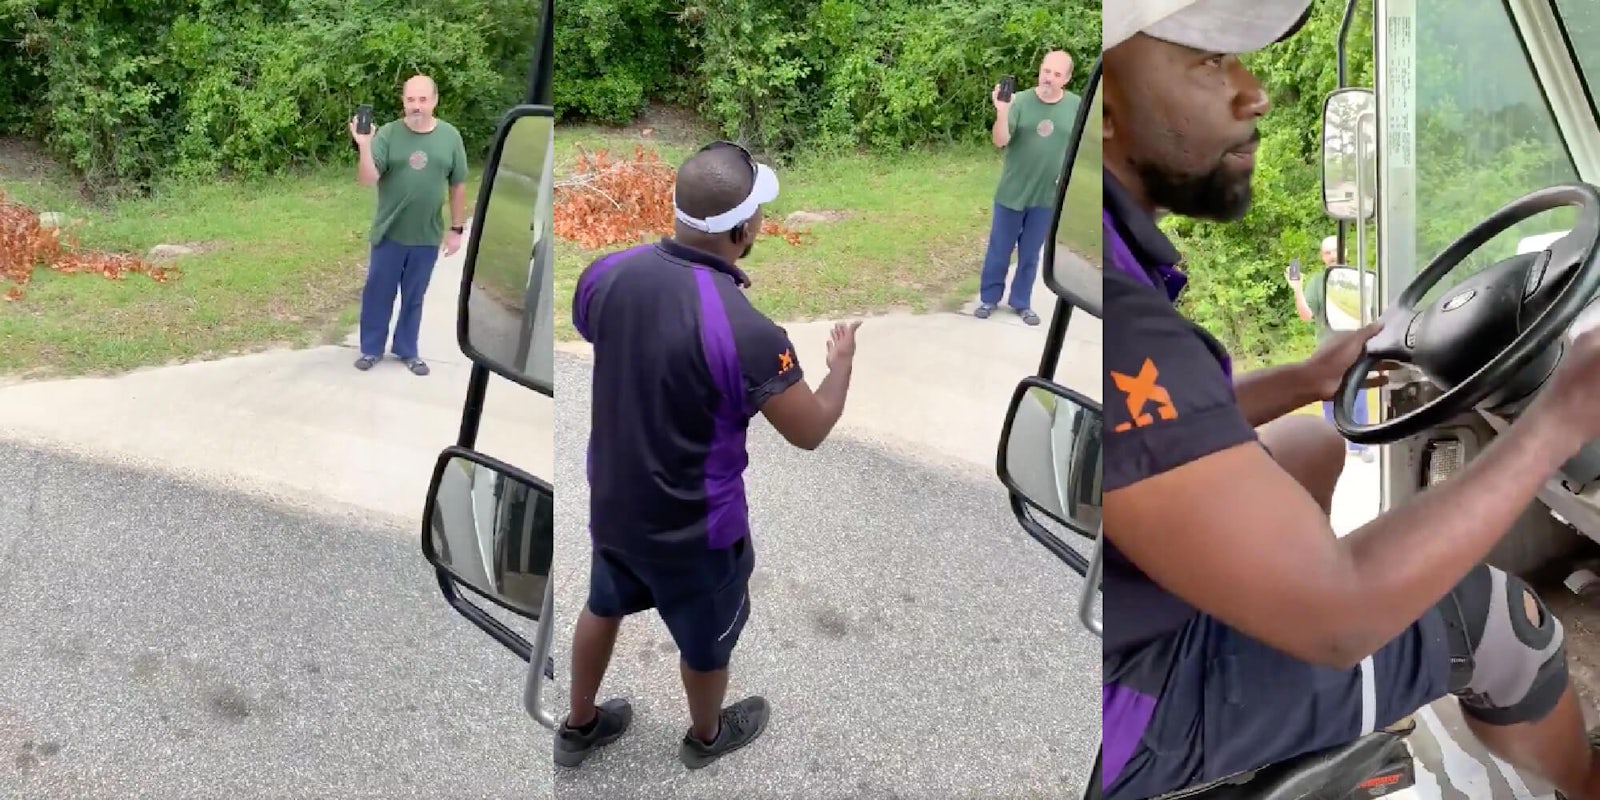 fedex workers fired video customer